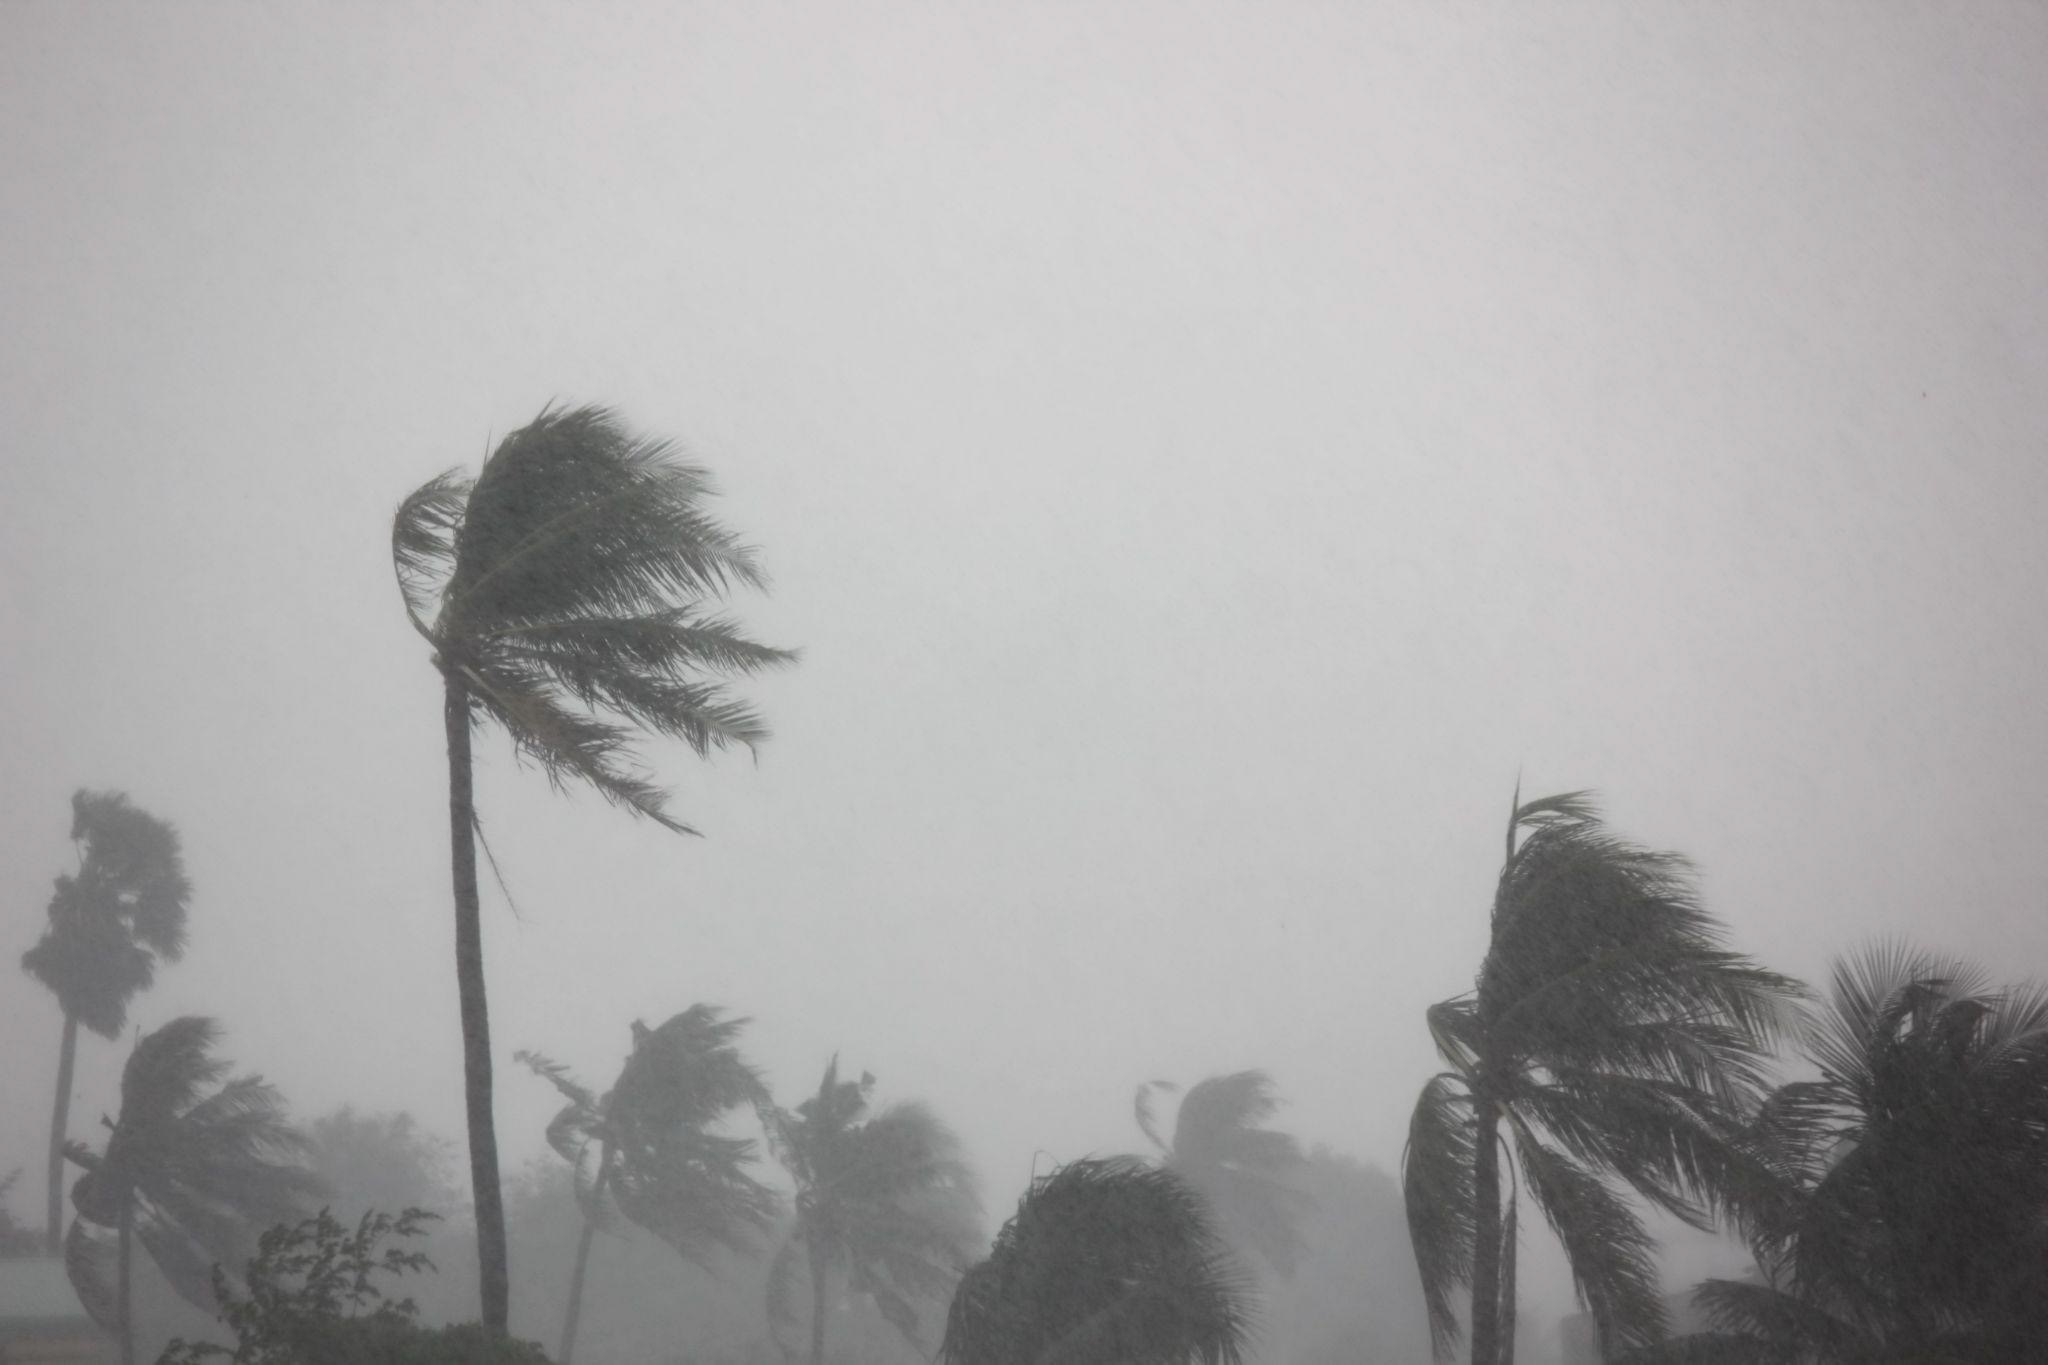 Tips To Keep Your Home Hurricane-Proof